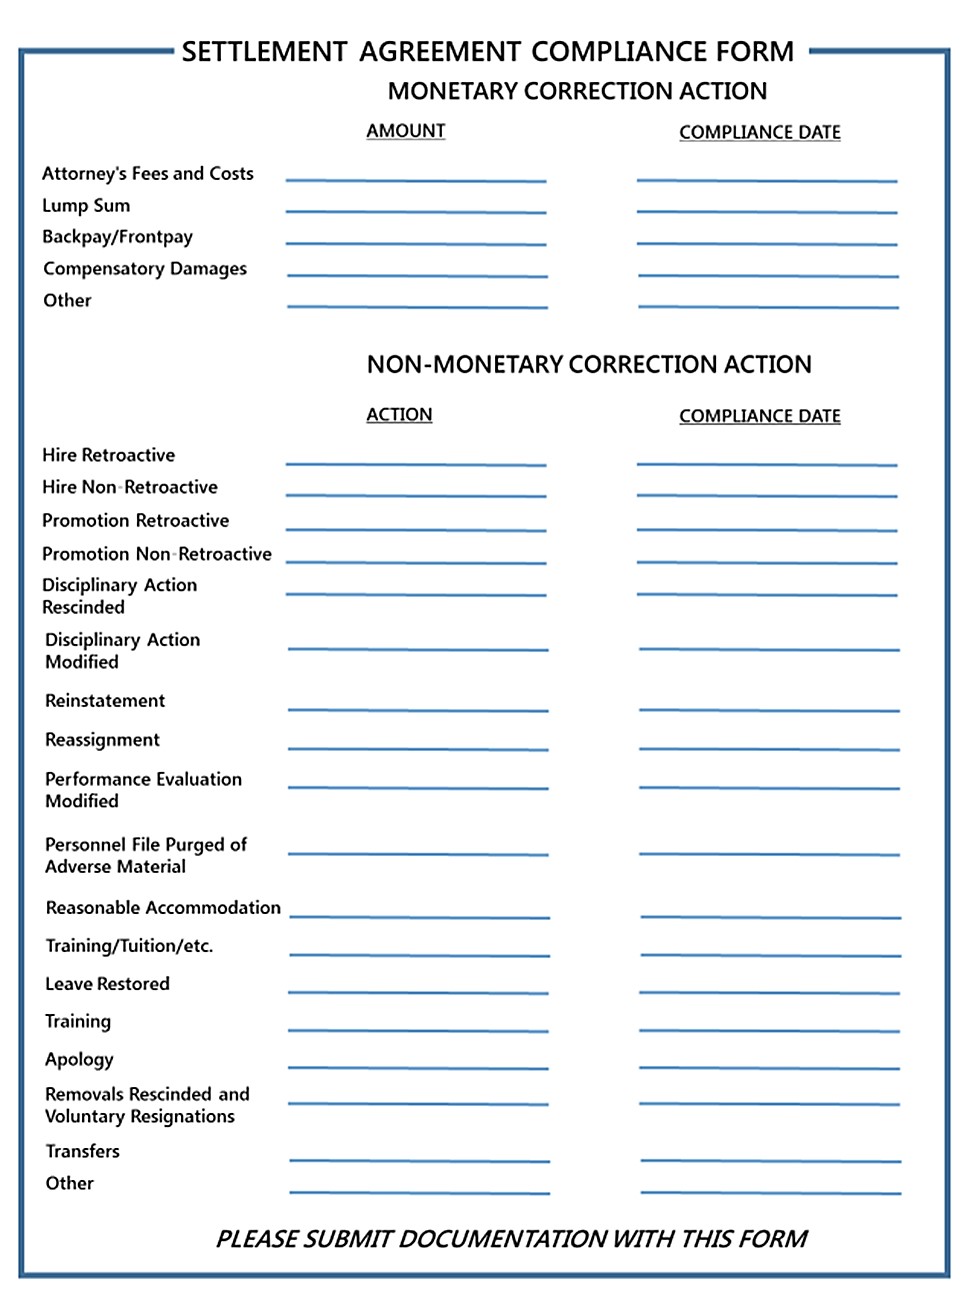 This image shows the format for C.7 Settlement Agreement Compliance Checklist.